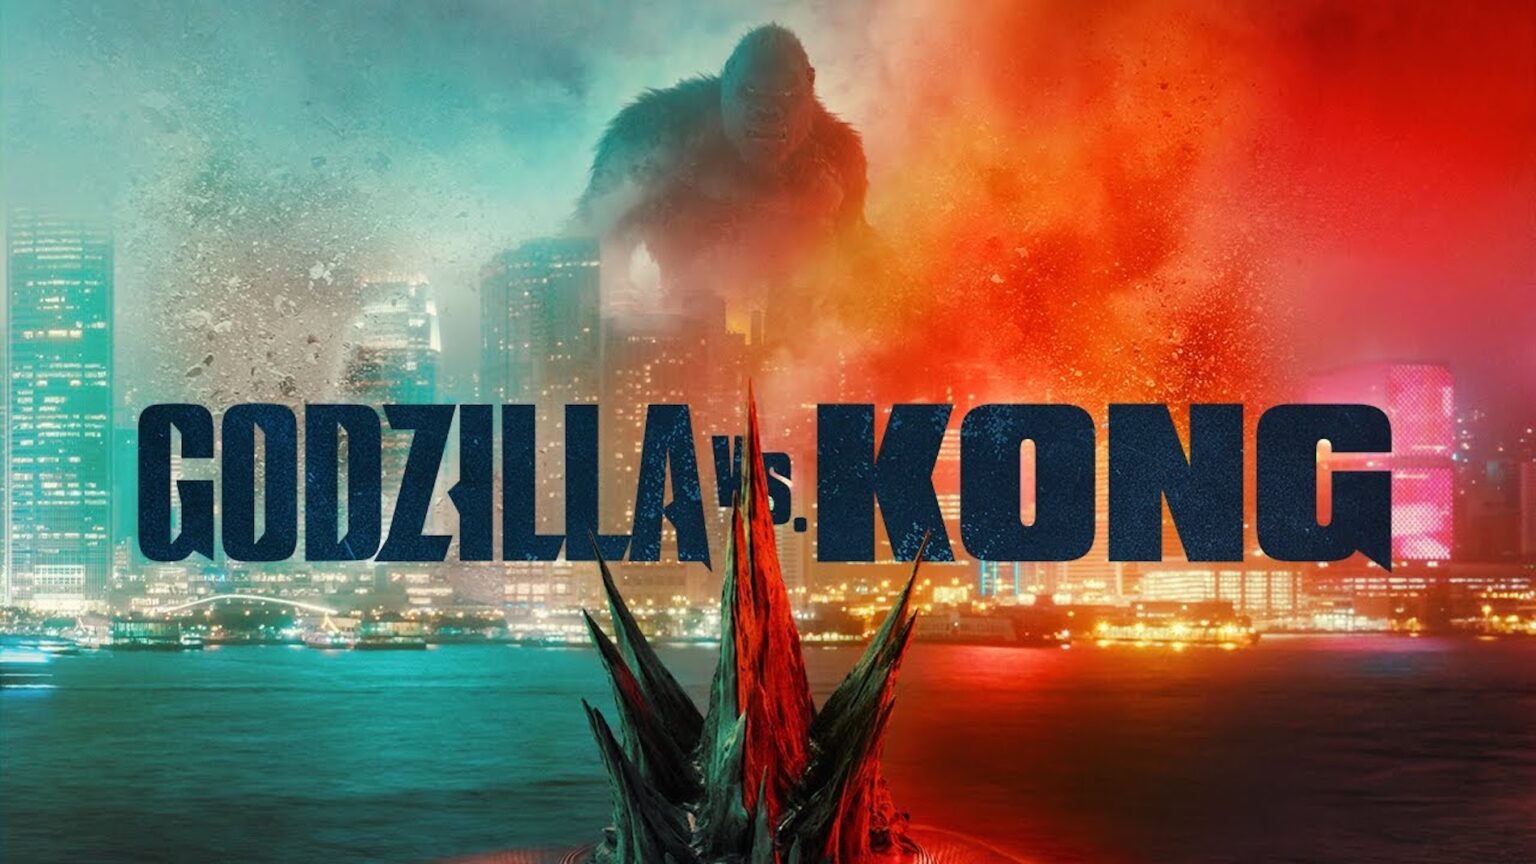 Hyped for 'Godzilla vs. Kong'? Prepare to see the Kings of Monsters duke it out by watching all the past Godzilla movies at these places.